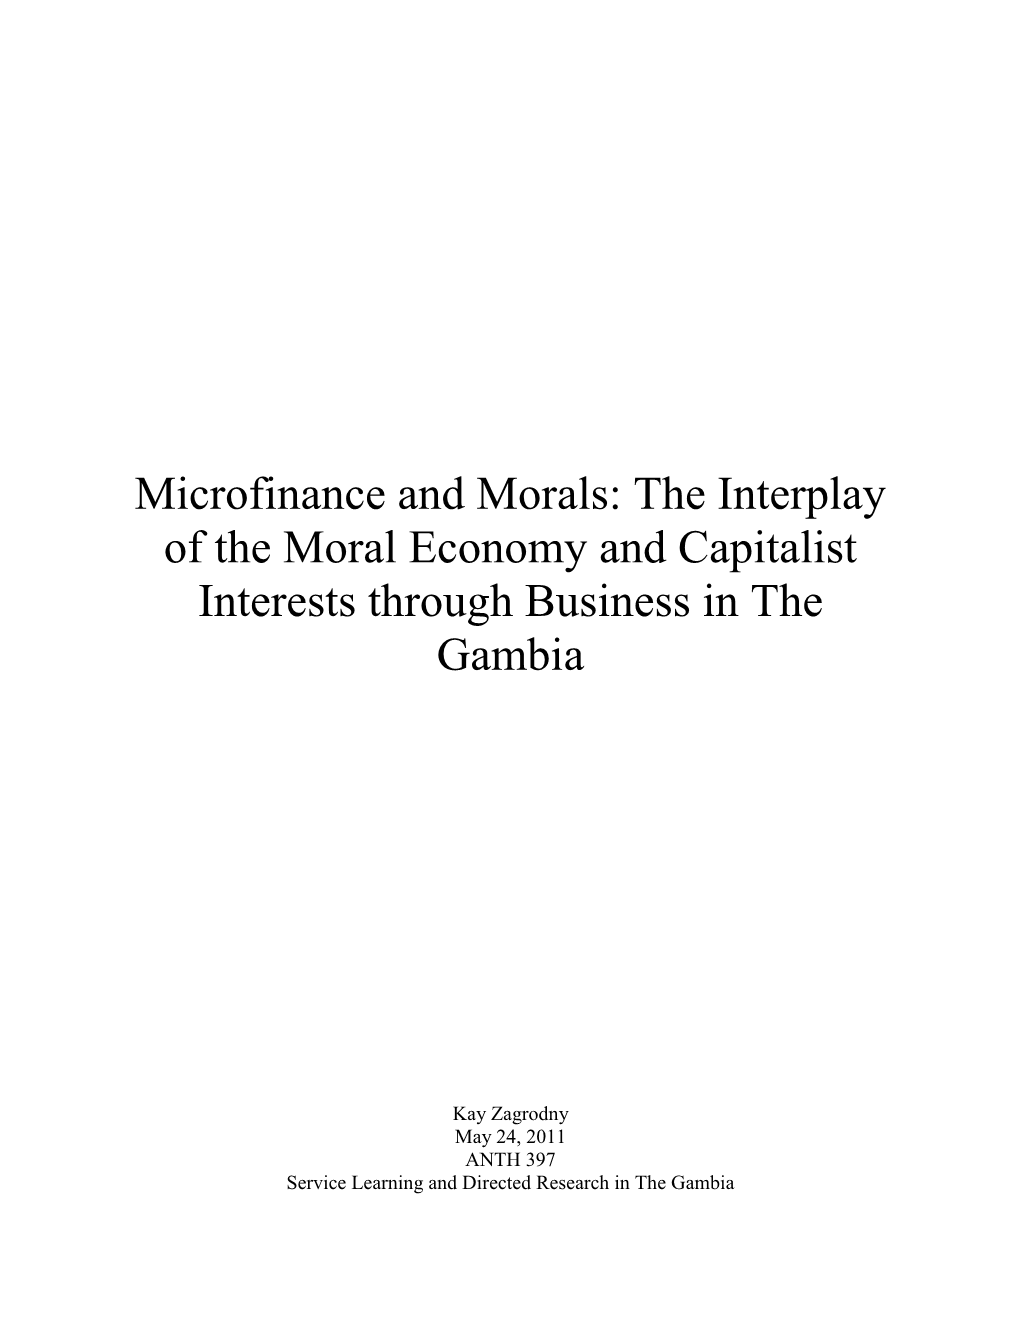 Microfinance and Morals: the Interplay of the Moral Economy and Capitalist Interests Through Business in the Gambia